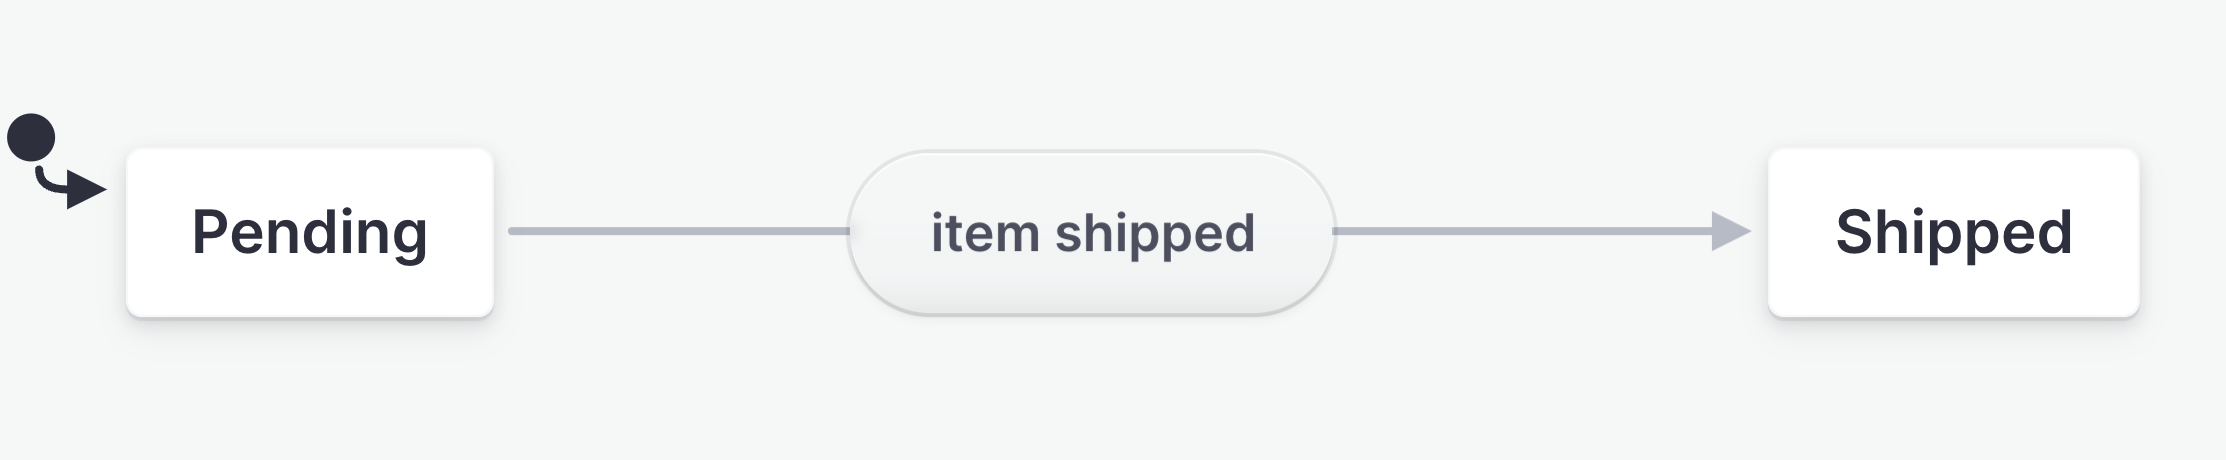 There is an initial Pending state. The machine transitions from Pending to the Shipped state with the item shipped event.